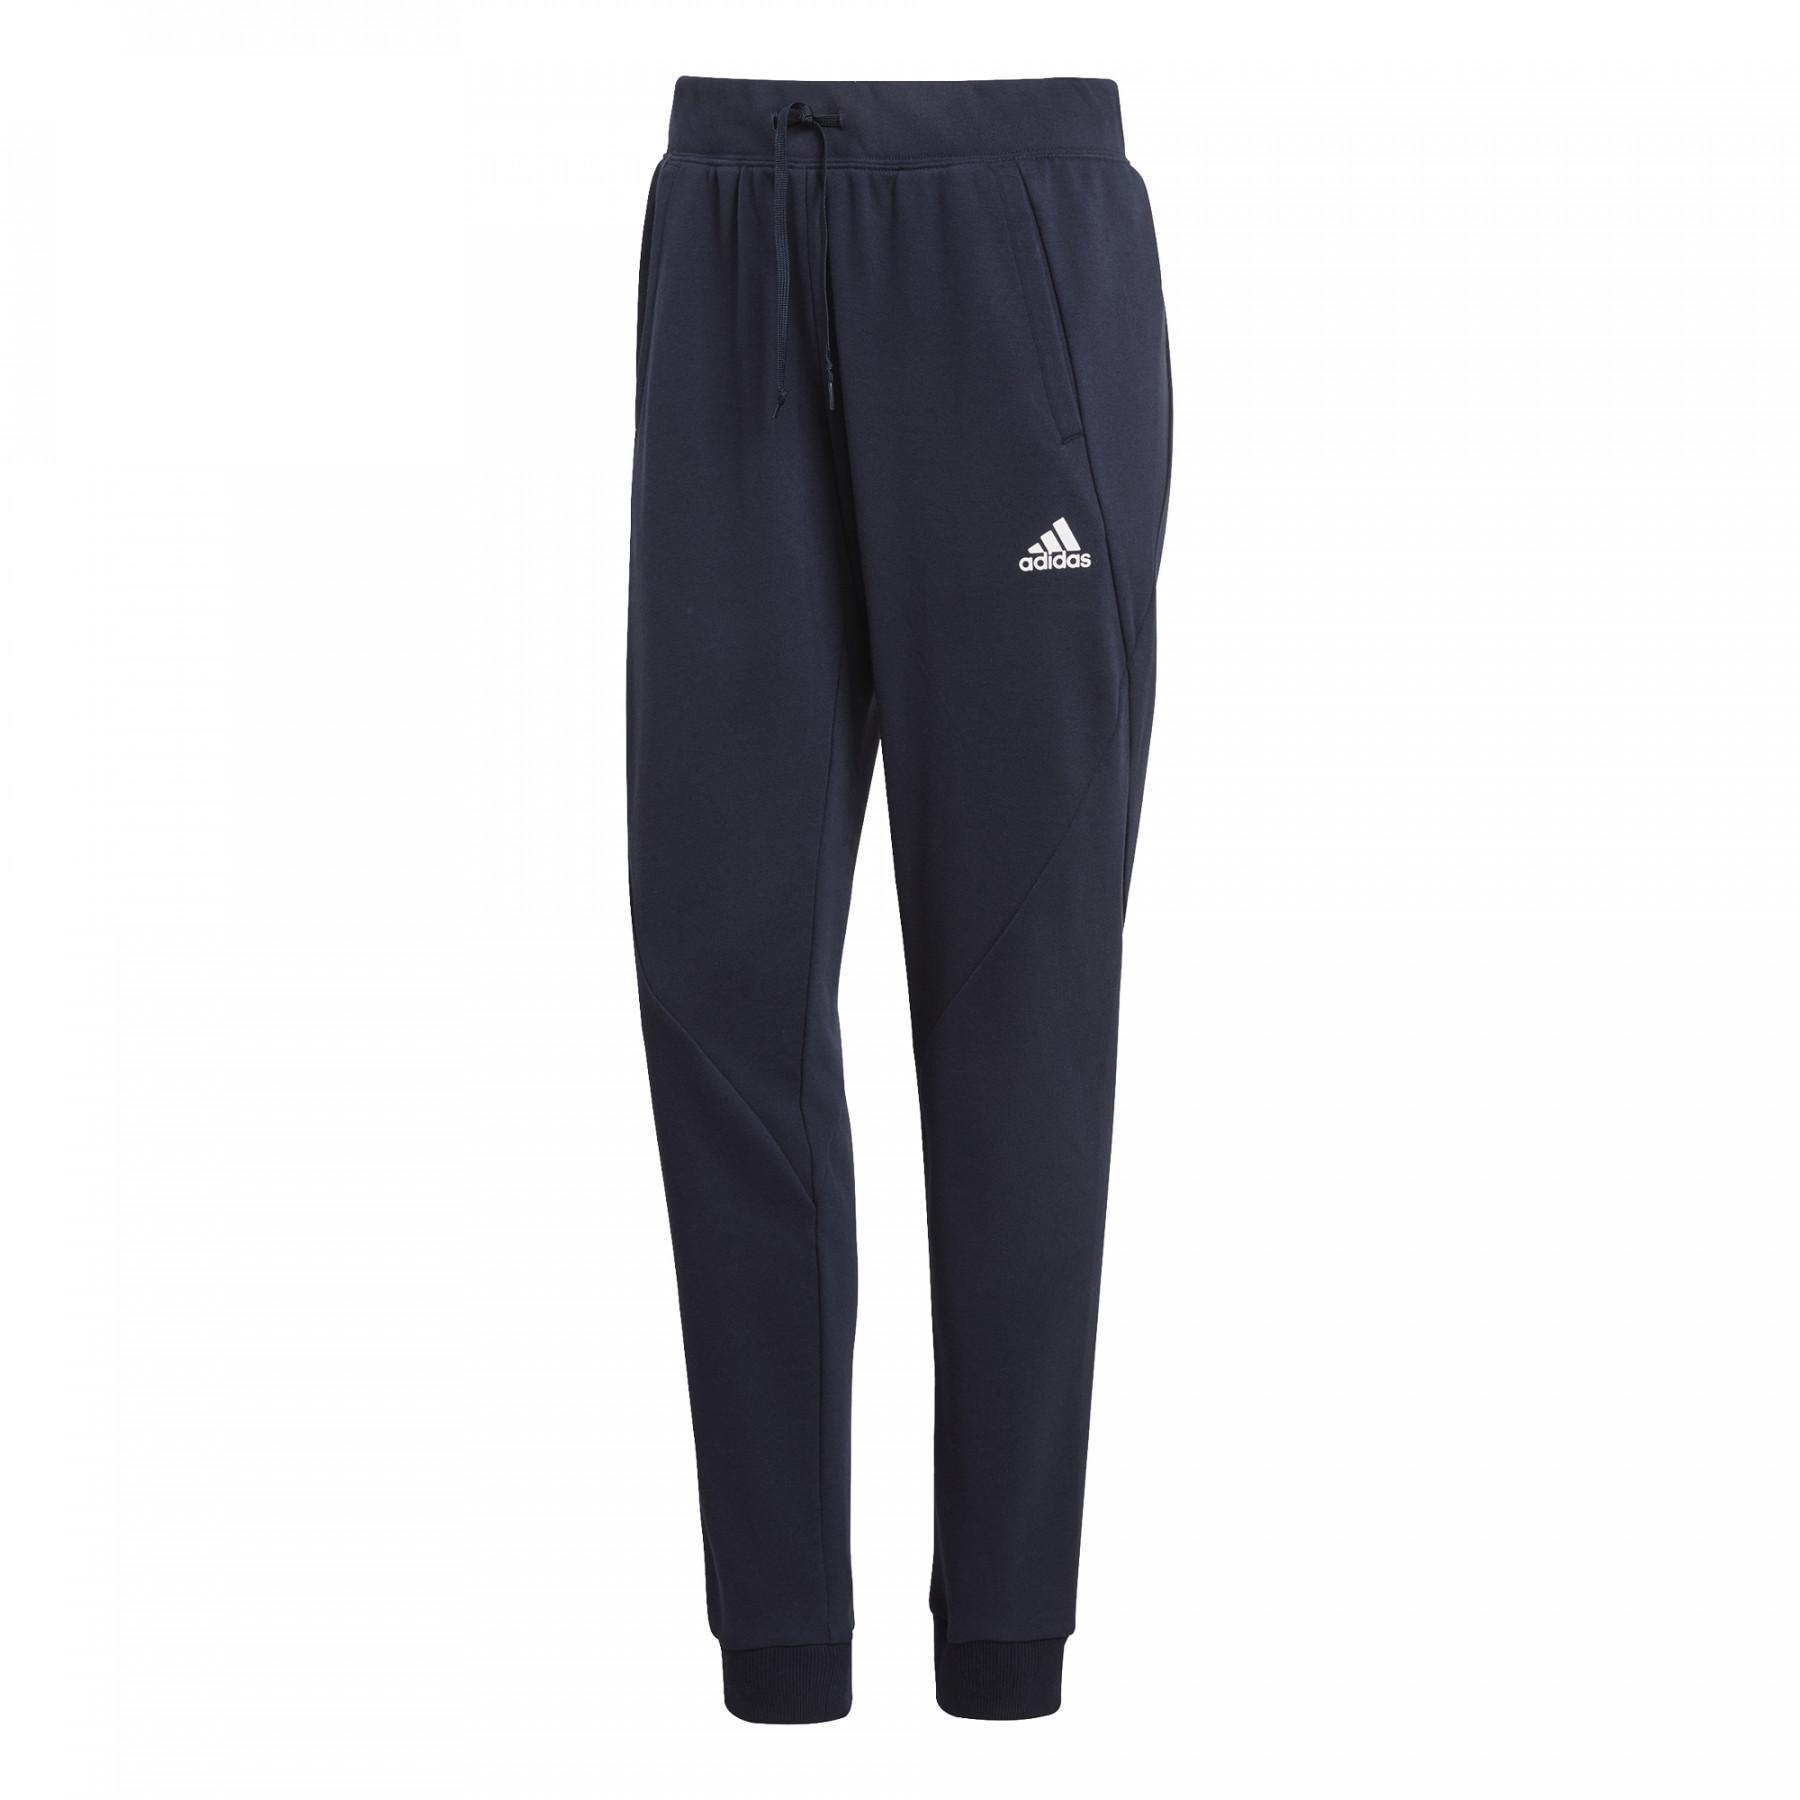 Women's tracksuit adidas Hooded